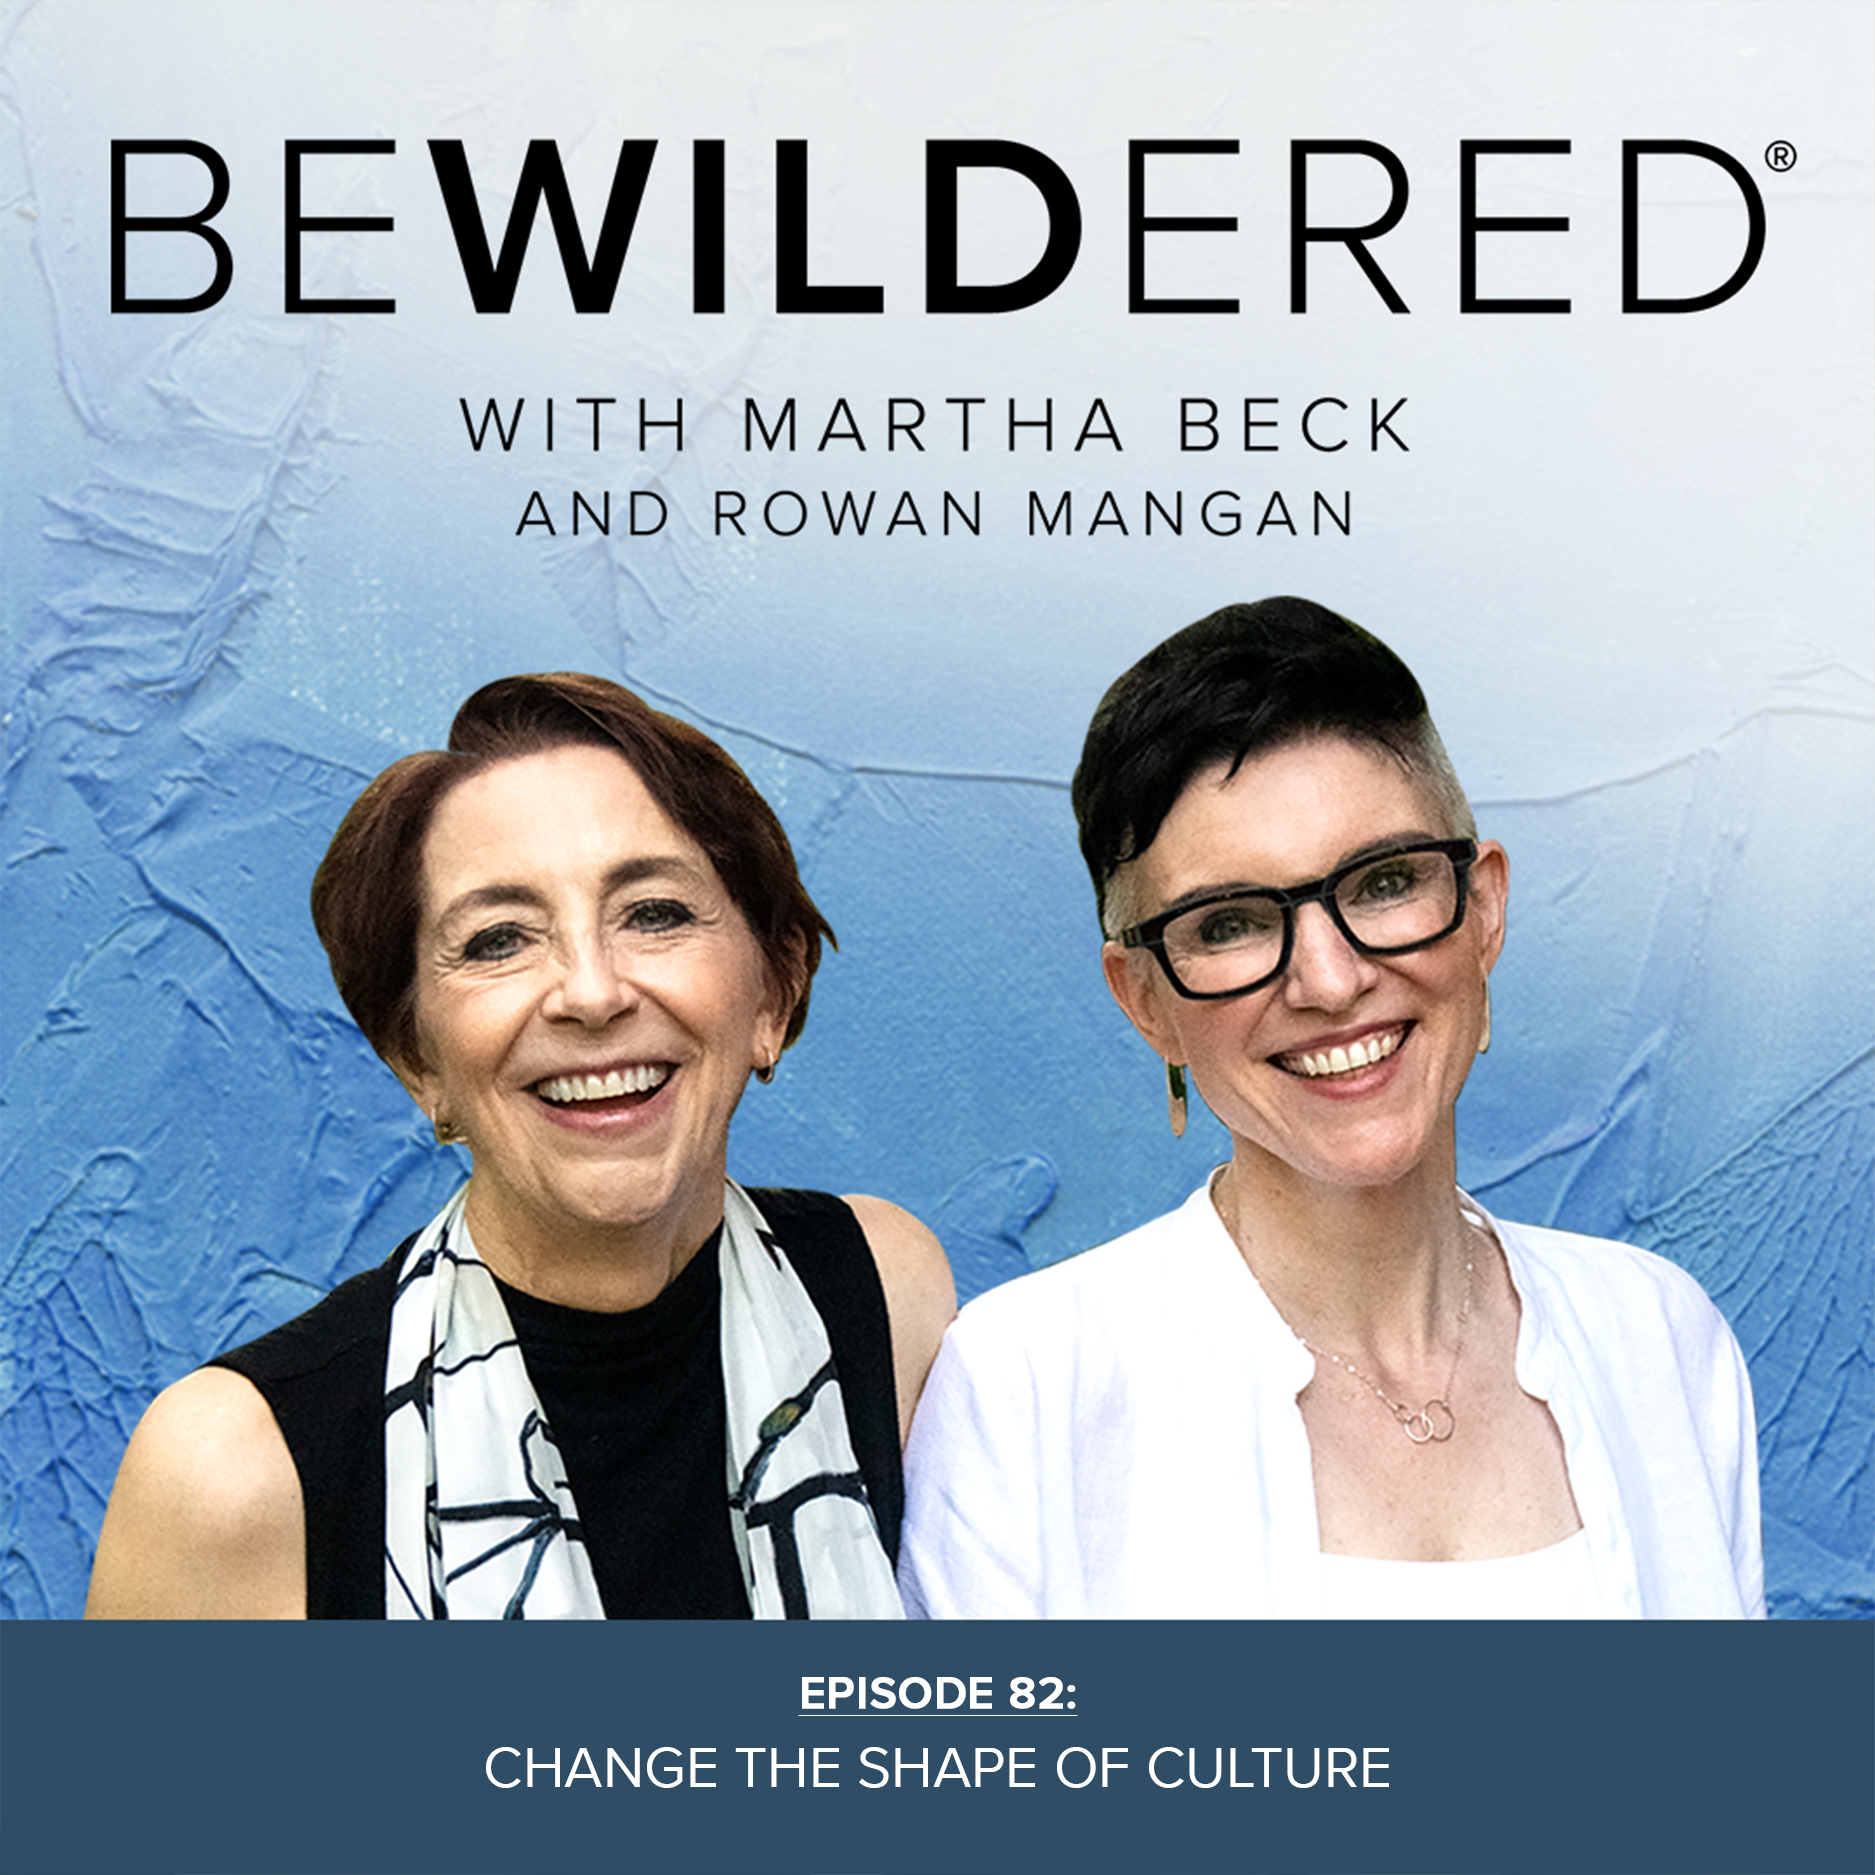 Image for Episode #82 Change the Shape of Culture for the Bewildered Podcast with Martha Beck and Rowan Mangan